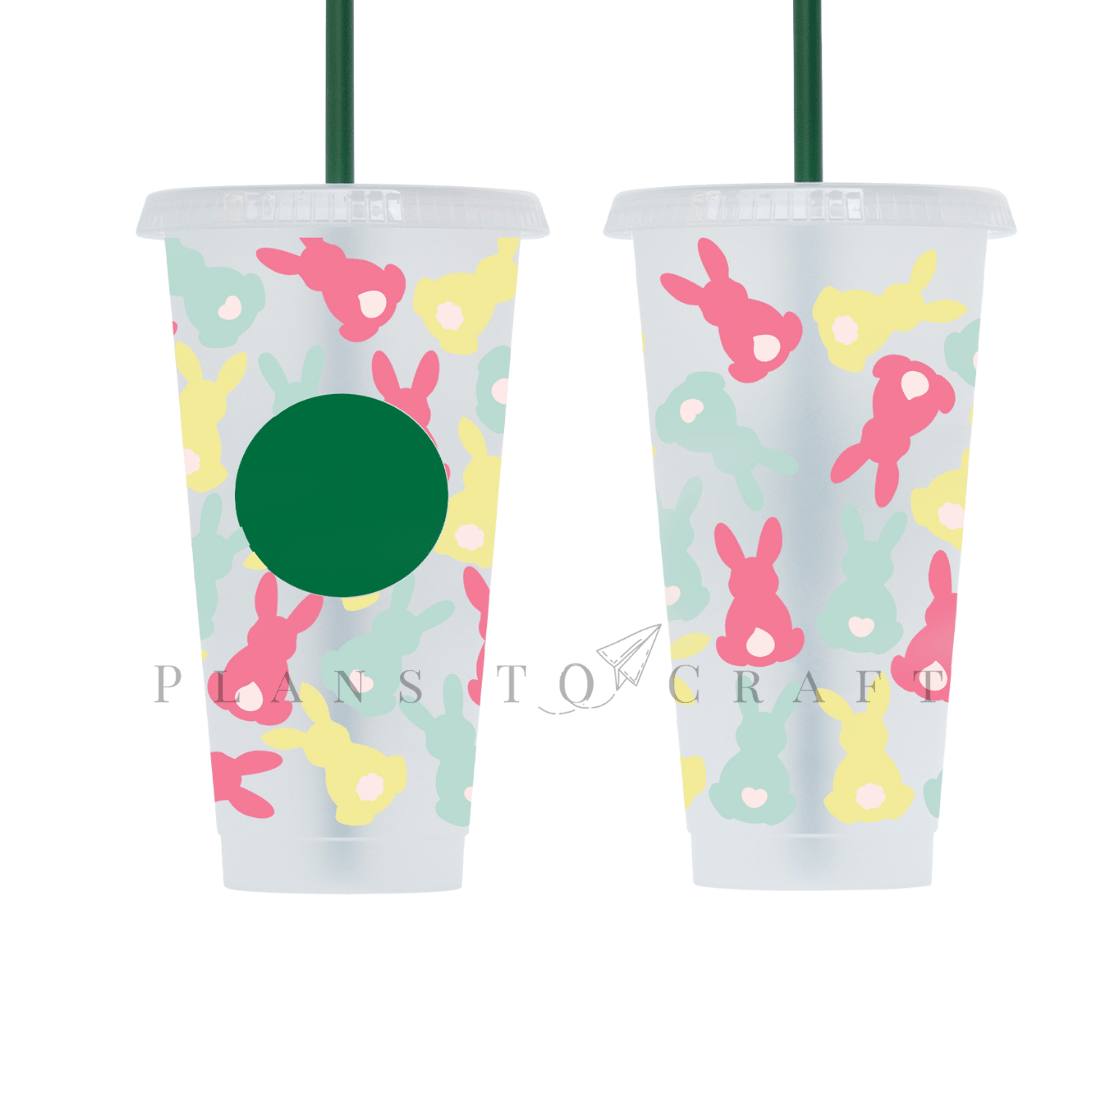 Two plastic cups with green straws and designs on them.